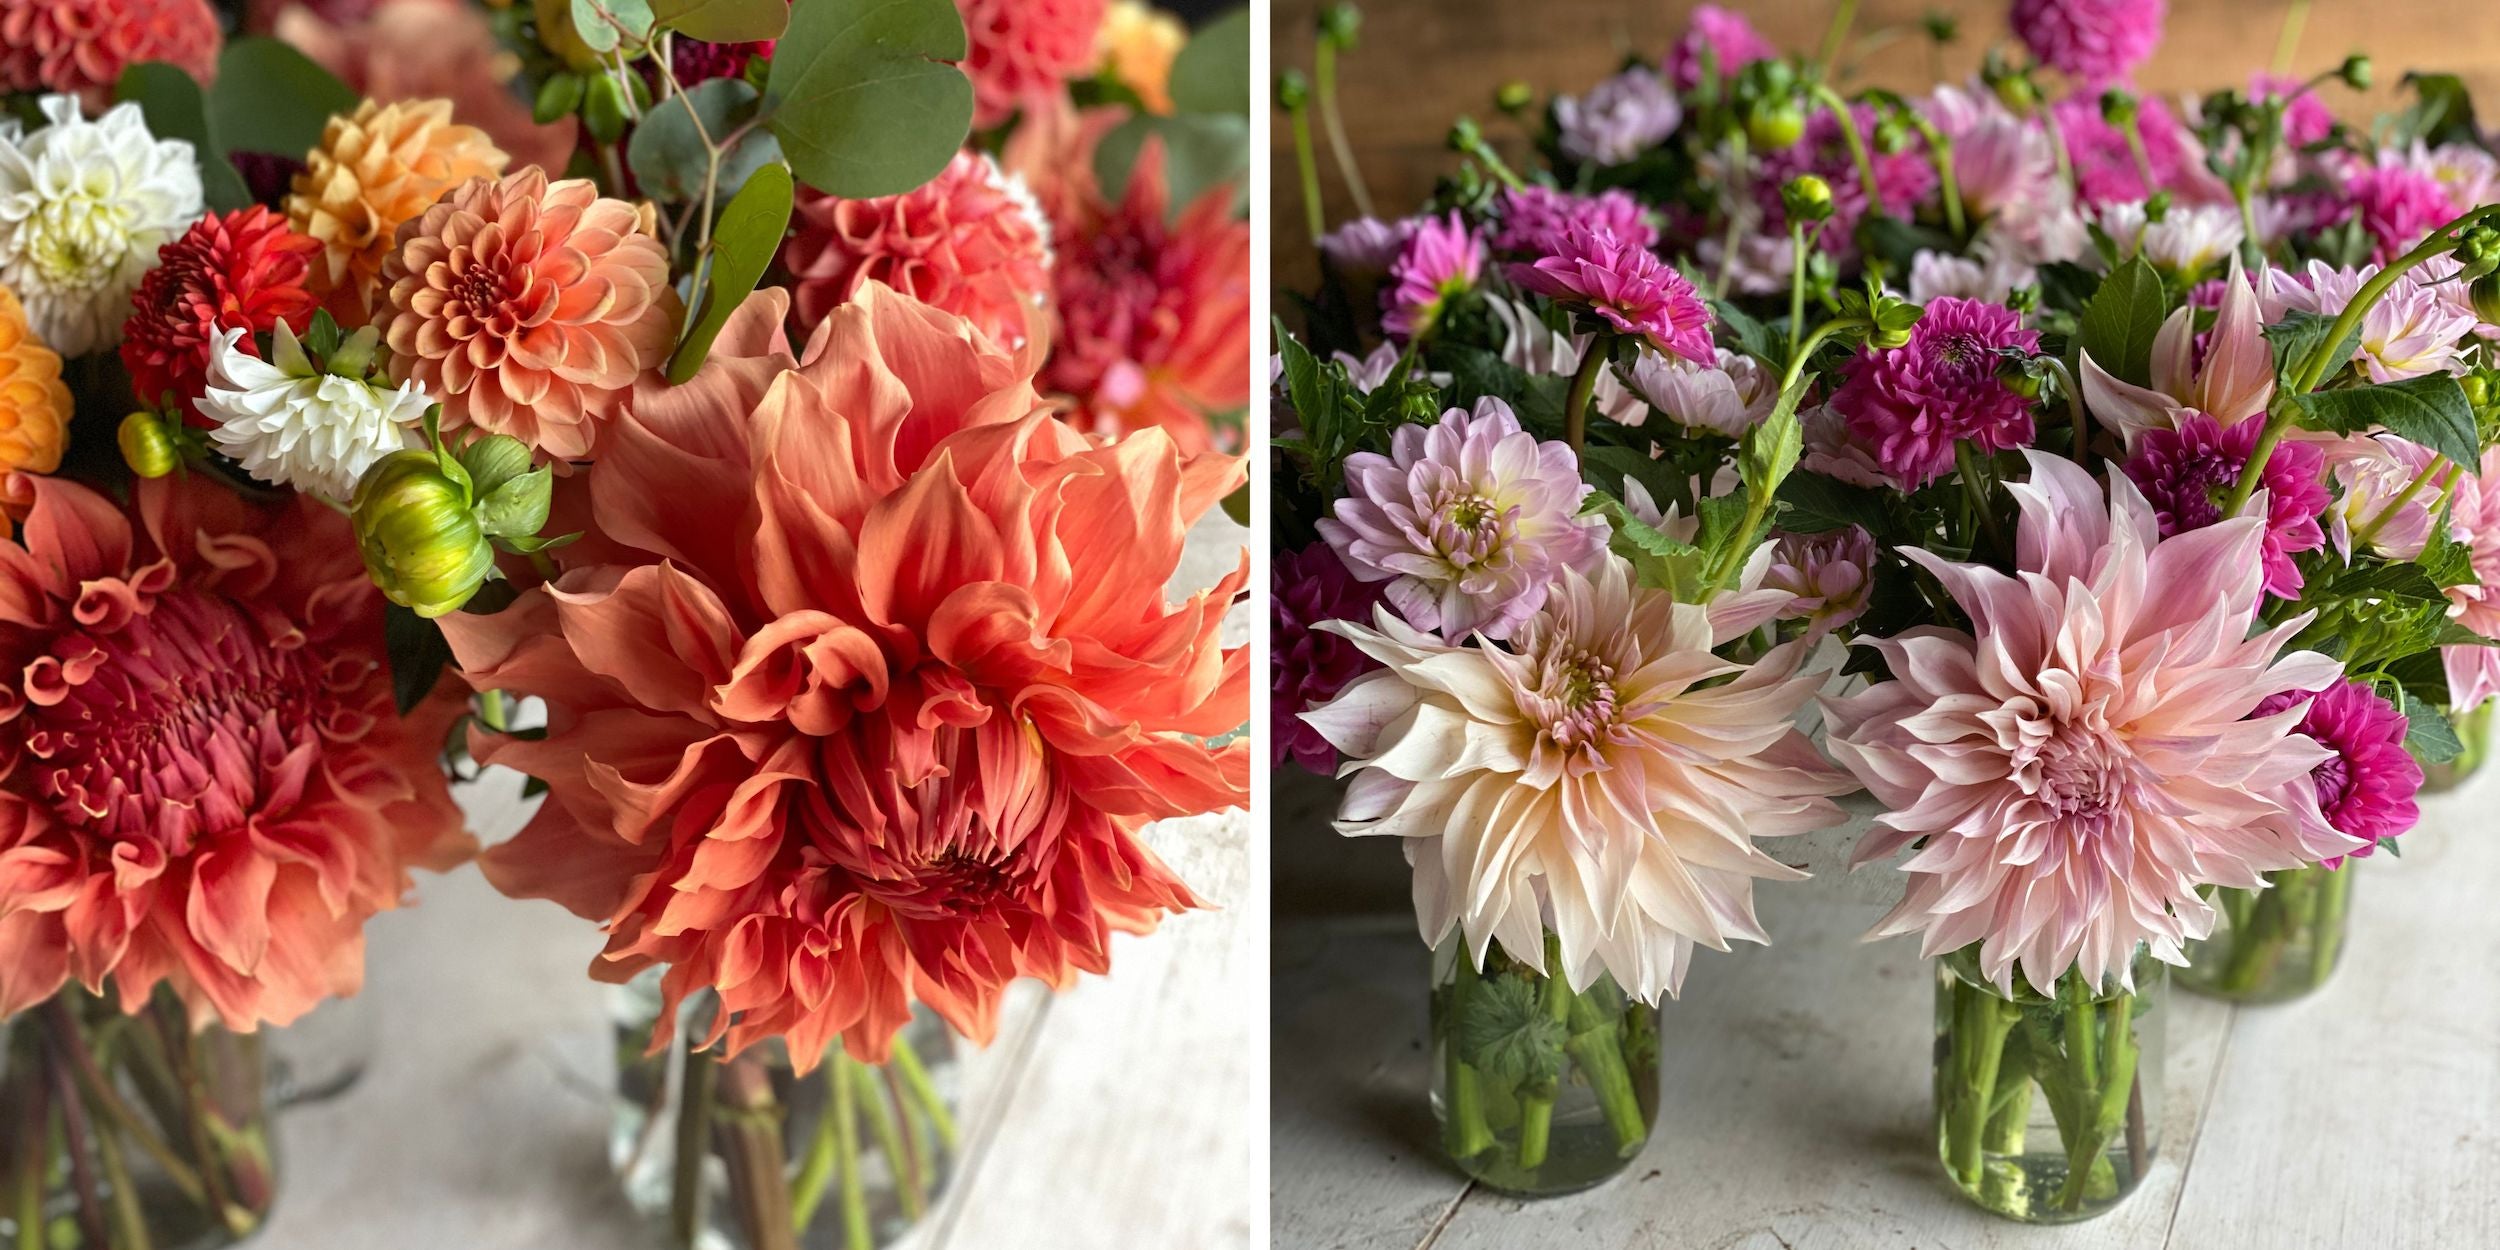 Dahlia jars at Rooted Flowers.